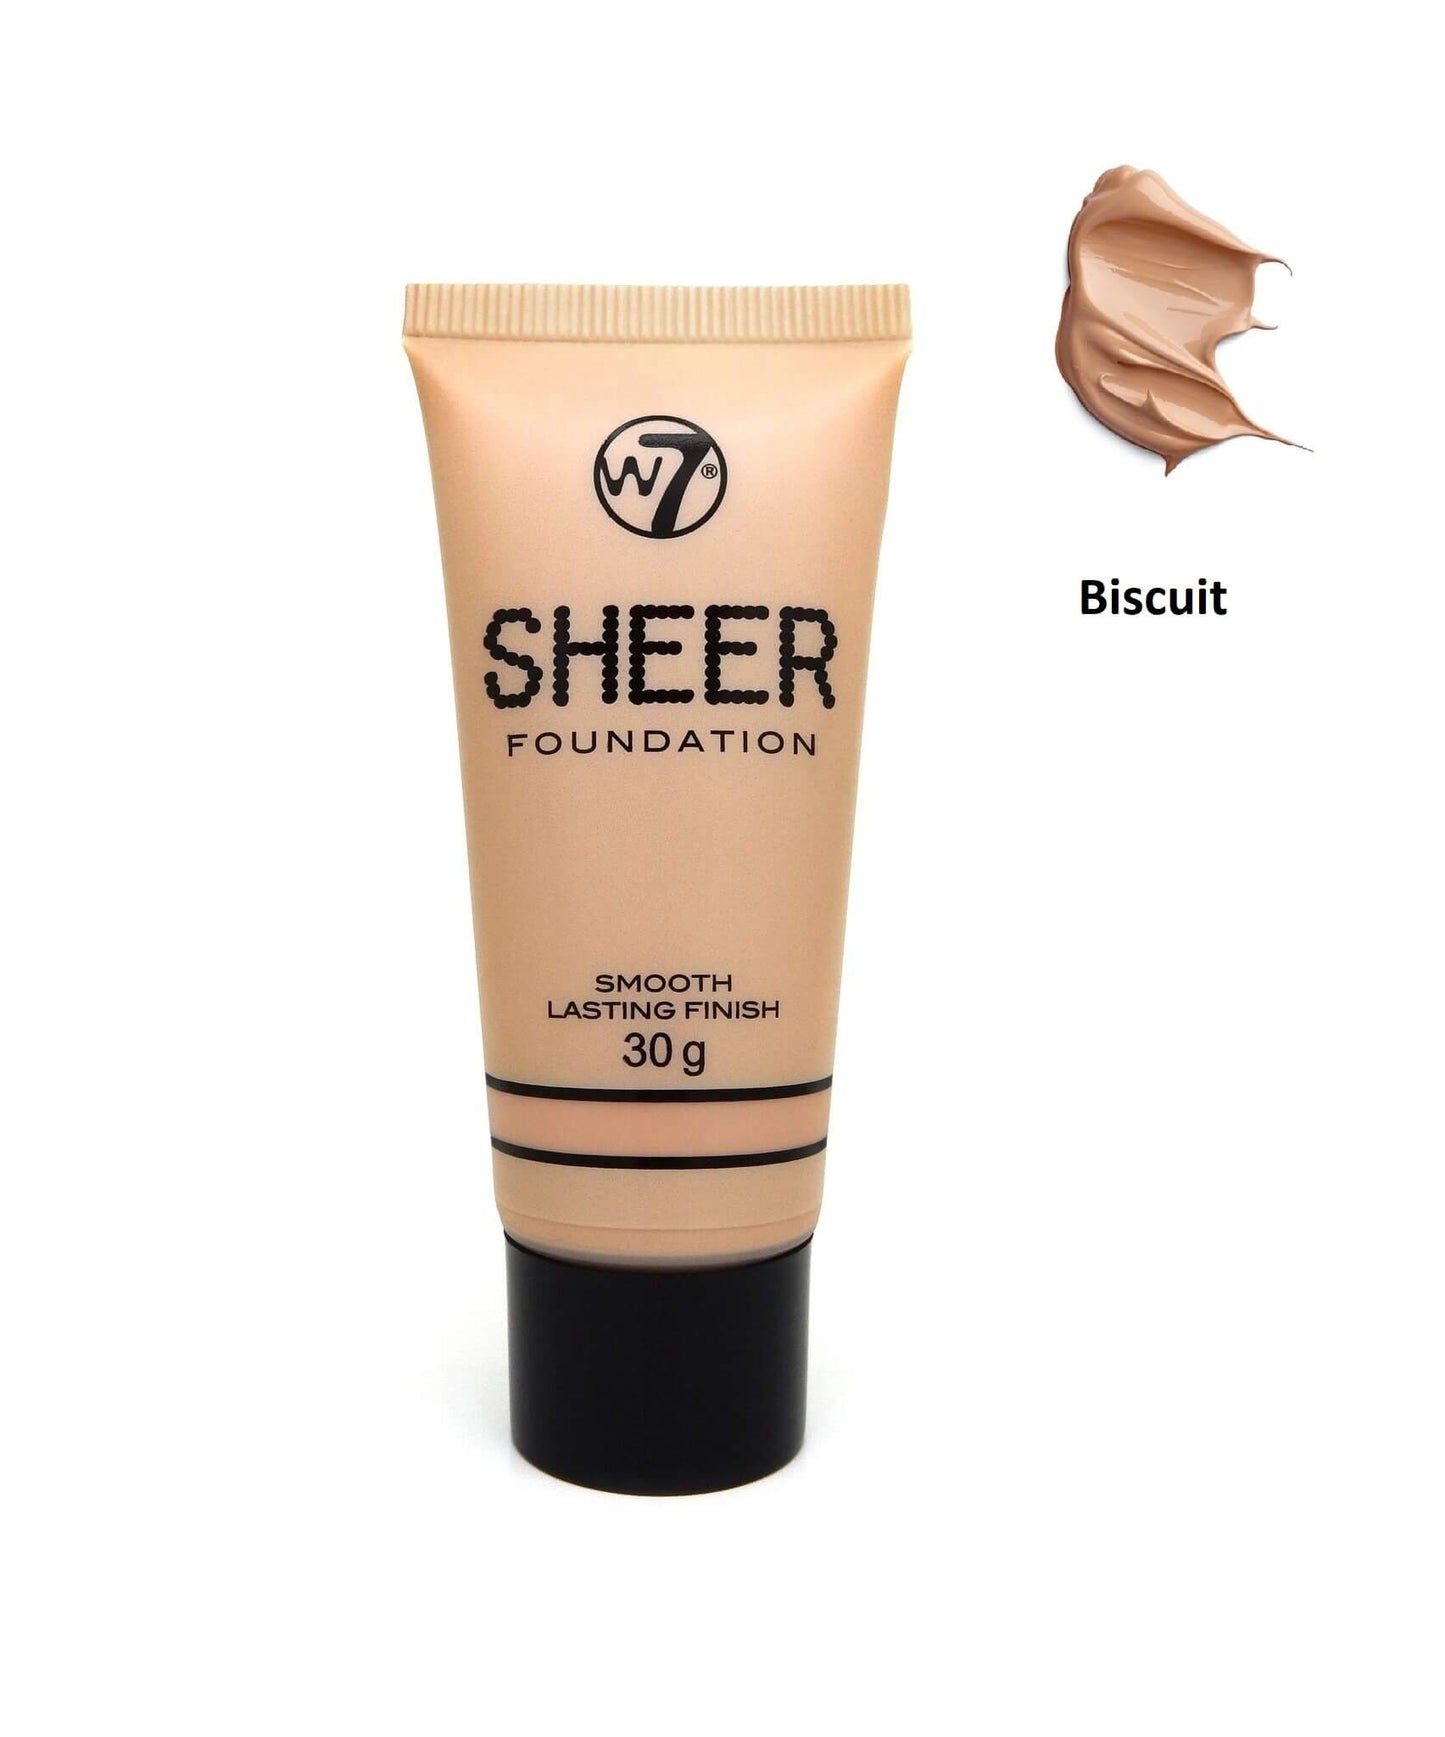 W7 Sheer Foundation - Biscuit